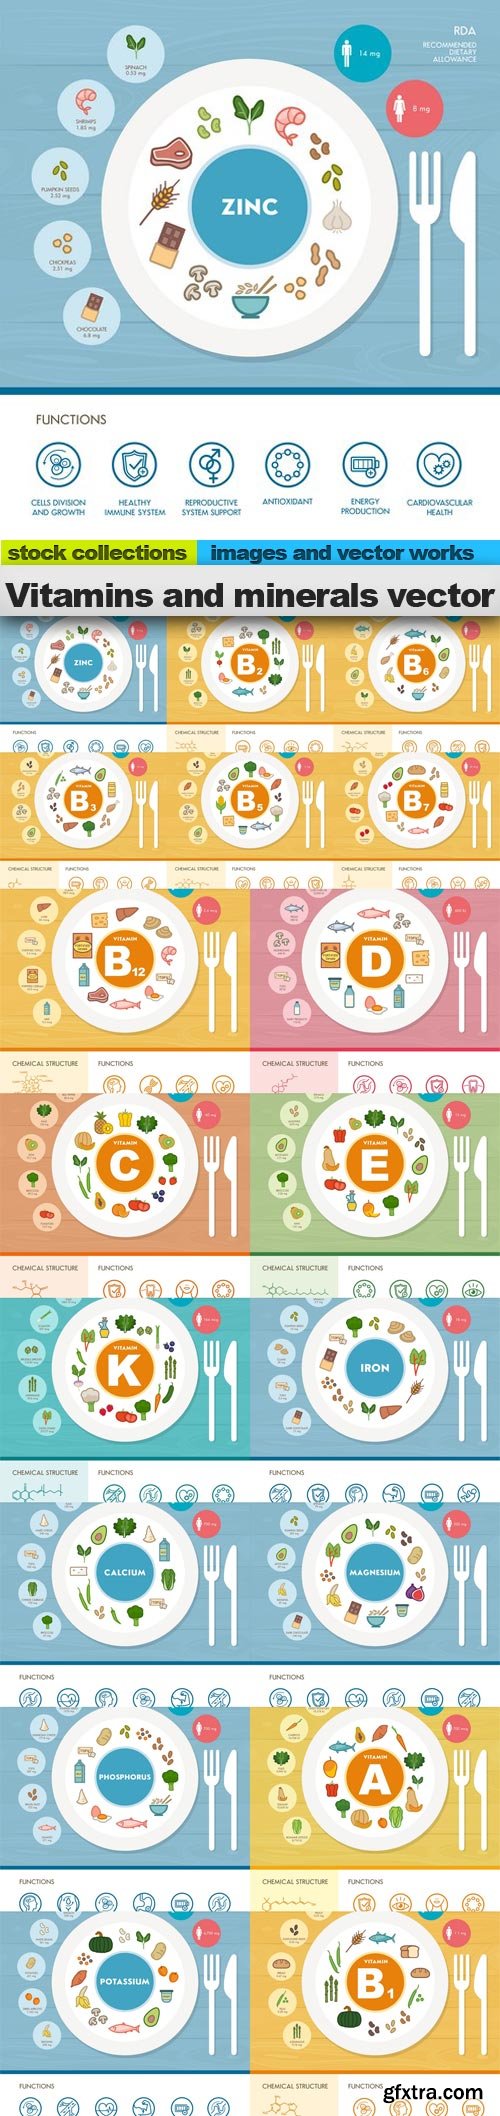 Vitamins and minerals vector, 18 x EPS